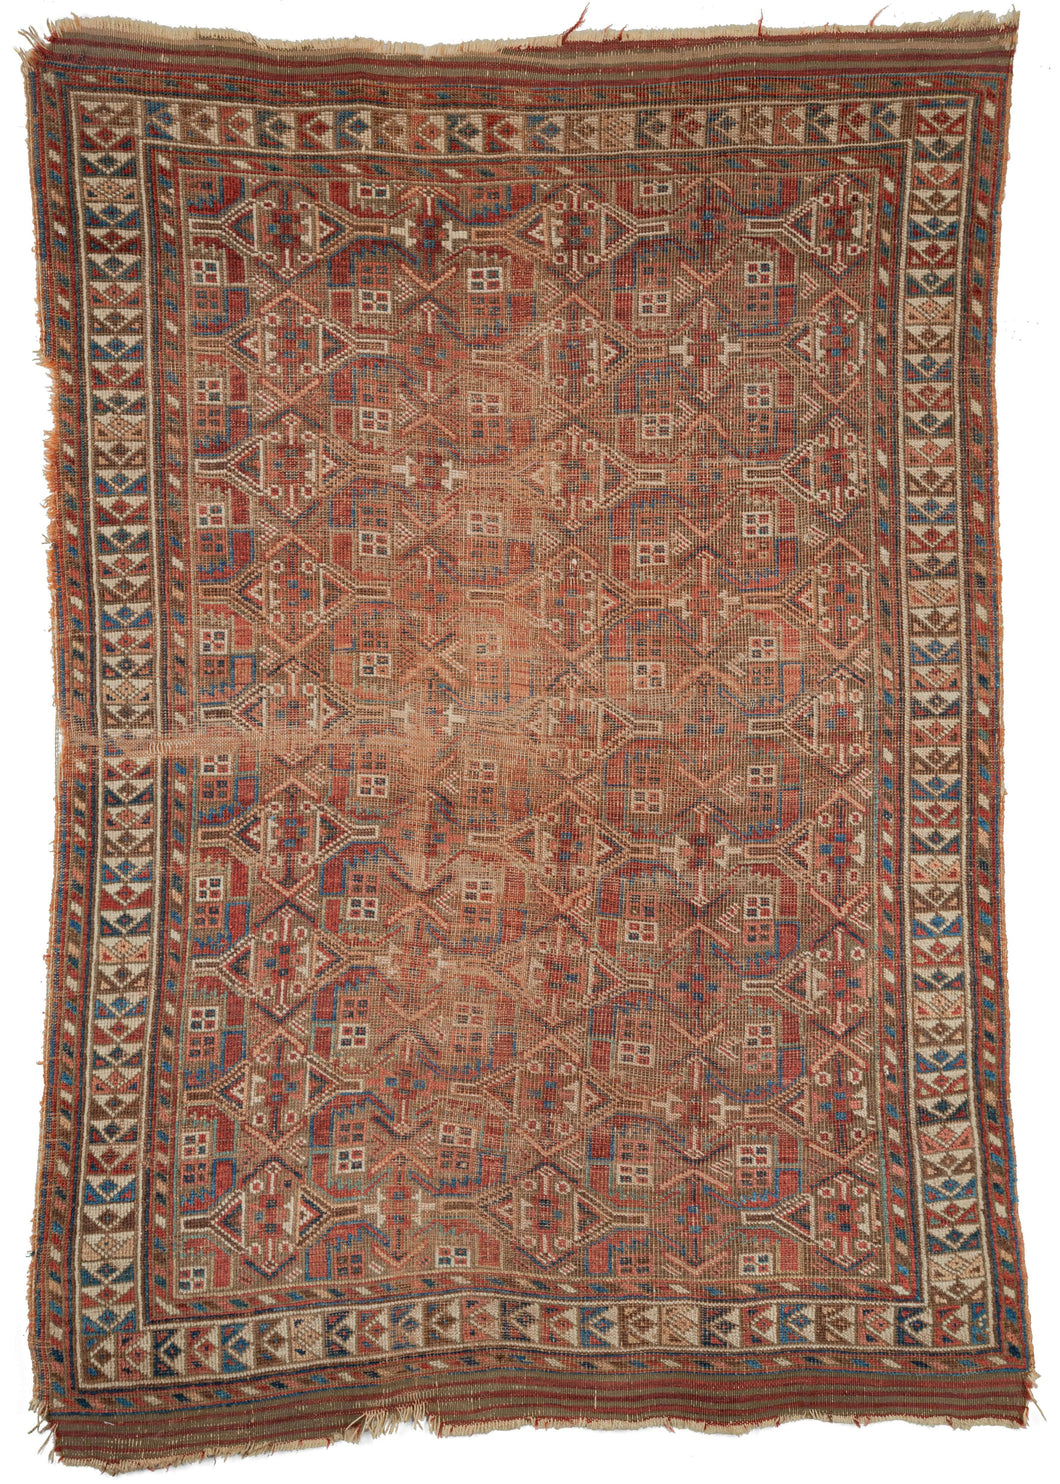 Antique Kerman area Baluch rug featuring patterning more common in nearby Afshar production. The field features an all-over abstraction of the classic Herati design rendered in blues, reds, purples, coral, and ivory on an oxidized brown ground. The major and minor borders are very graphic as well and it is here where colors shine most. Some of the original kilim ends remain intact.